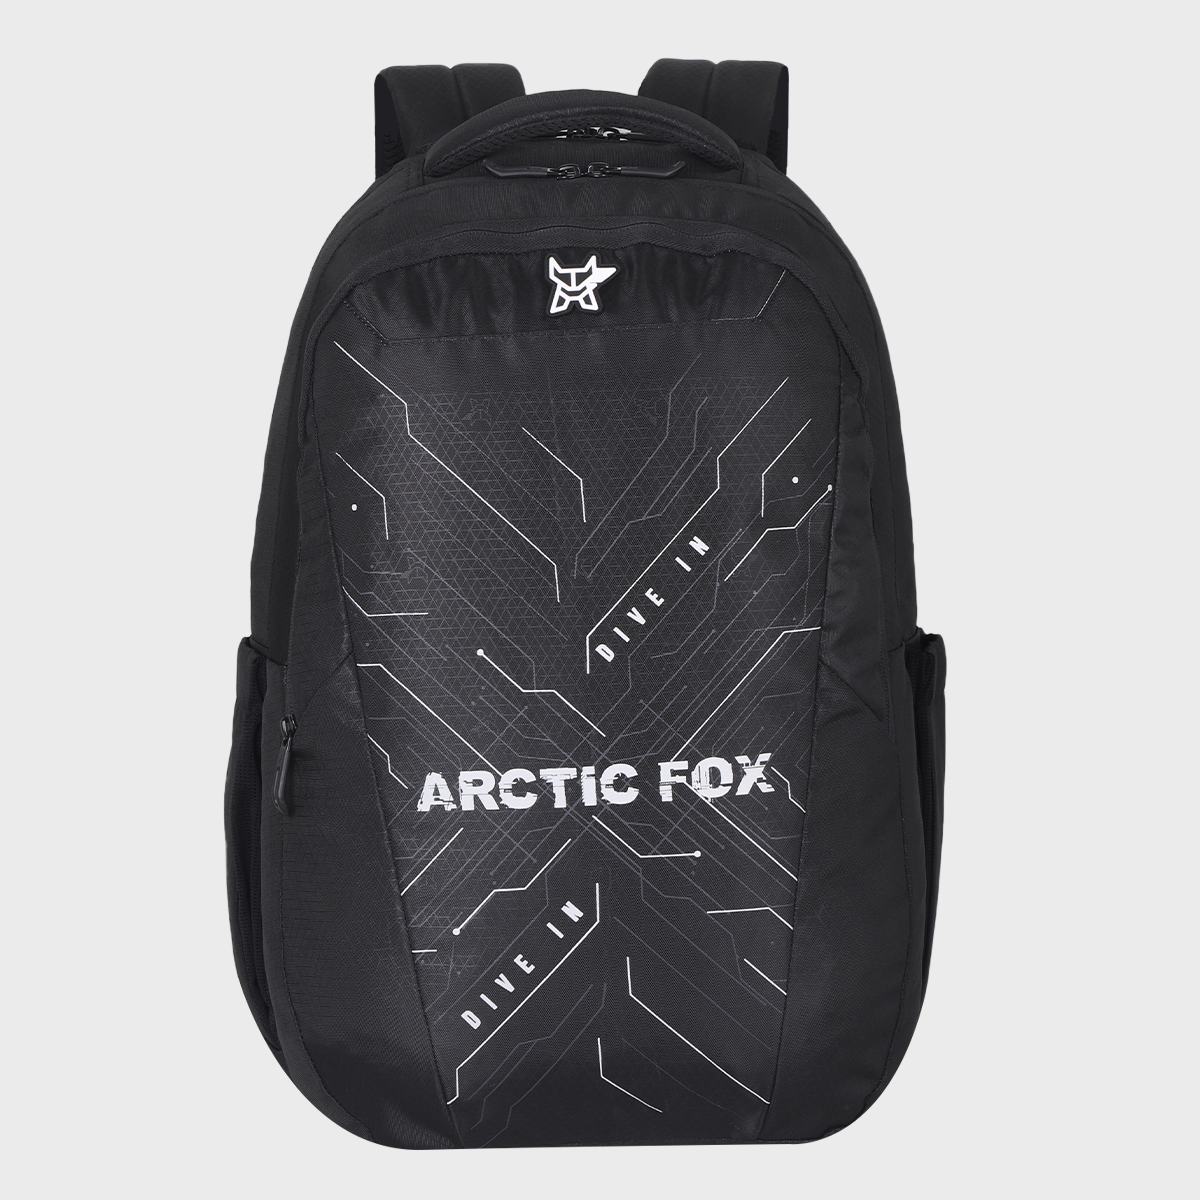 Arctic Fox Laptop Backpack 15.6" and travel backpack Infinite Black